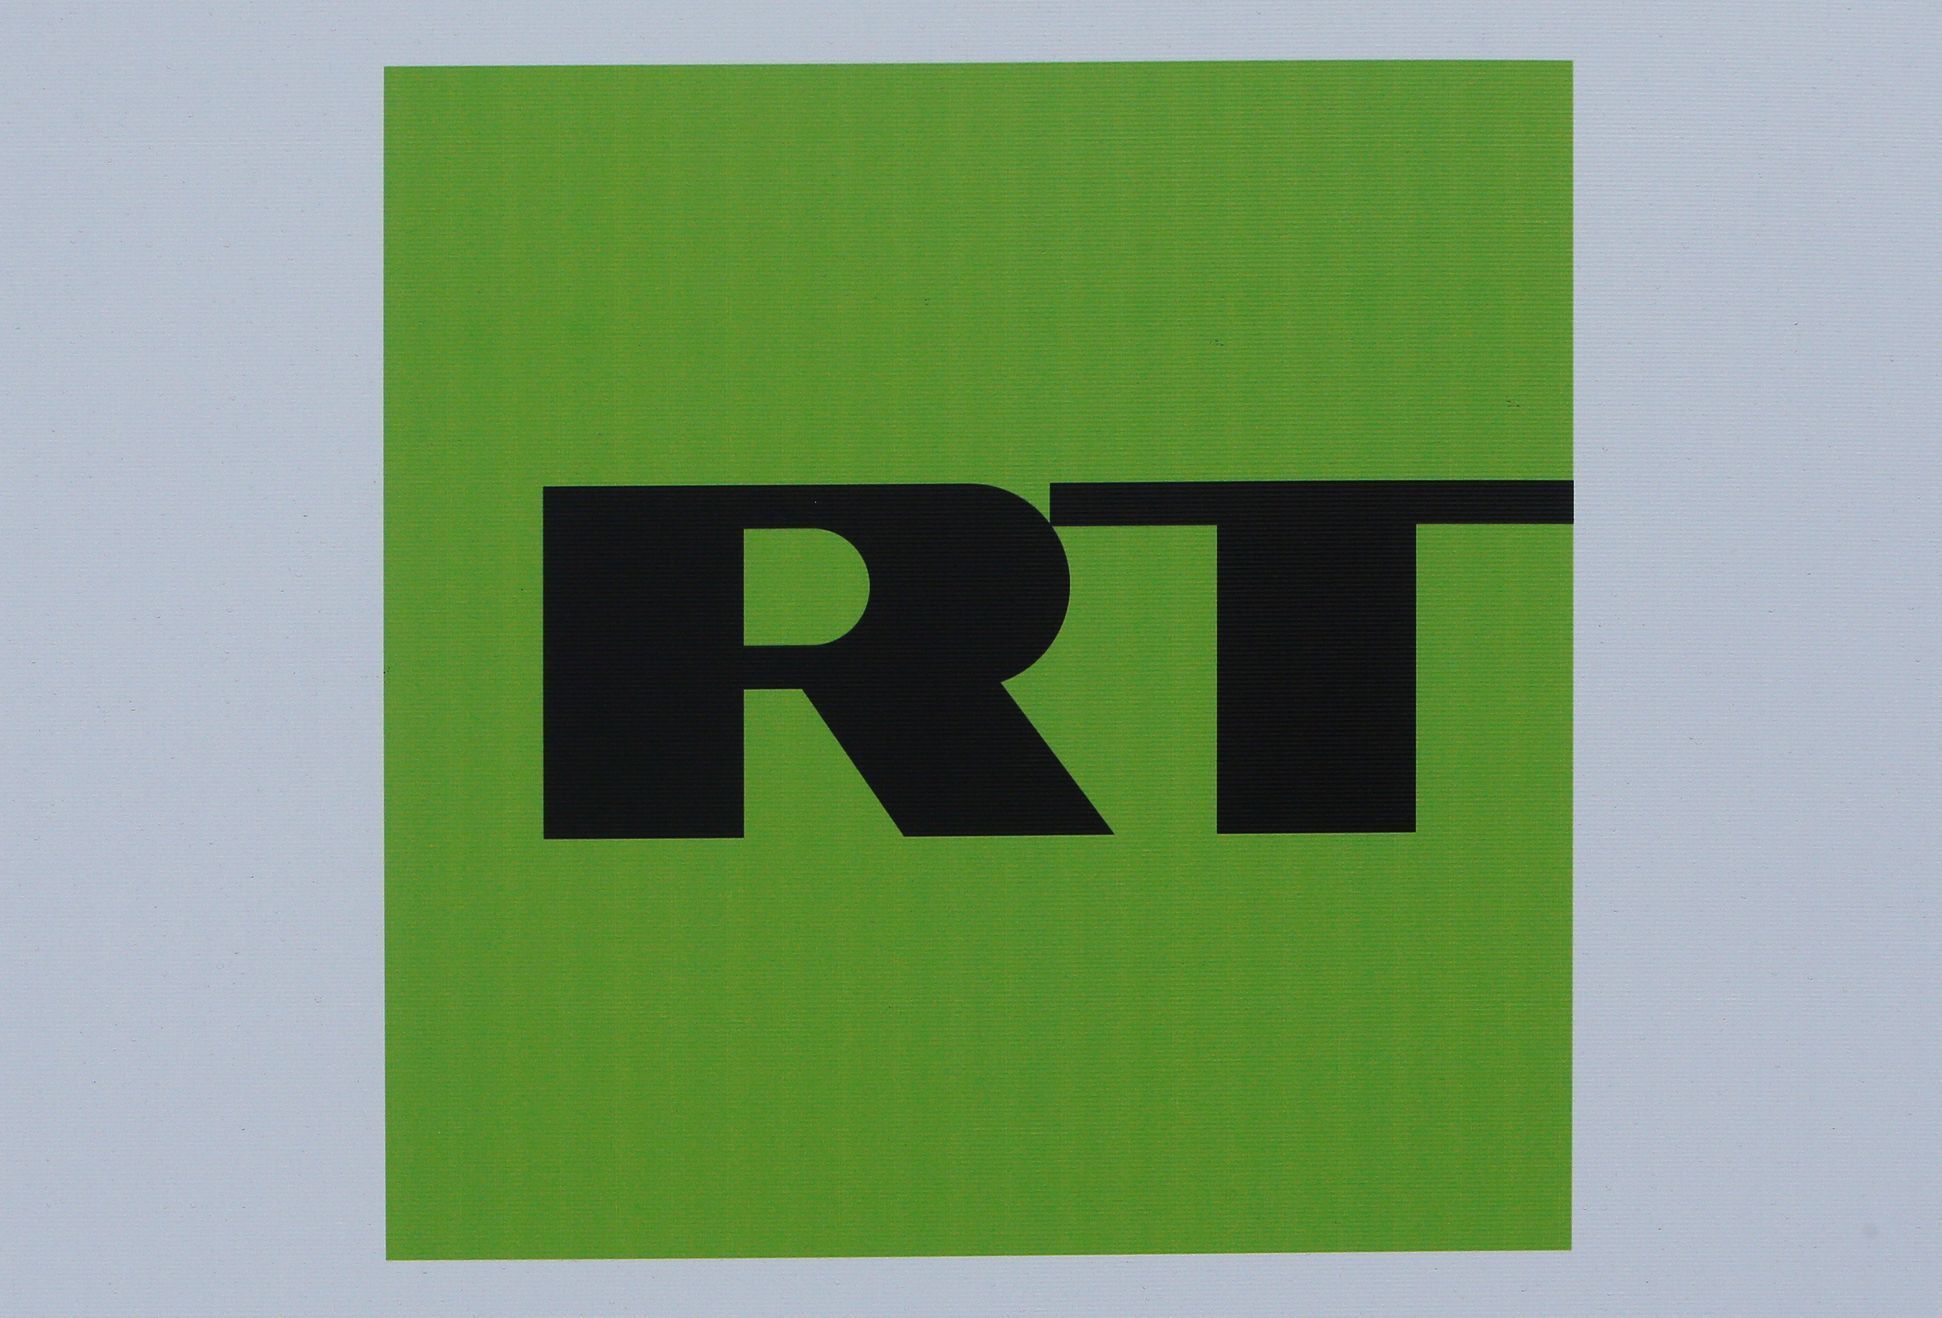 FILE PHOTO: The logo of Russian television network RT is seen on a board at the SPIEF 2017 in St. Petersburg